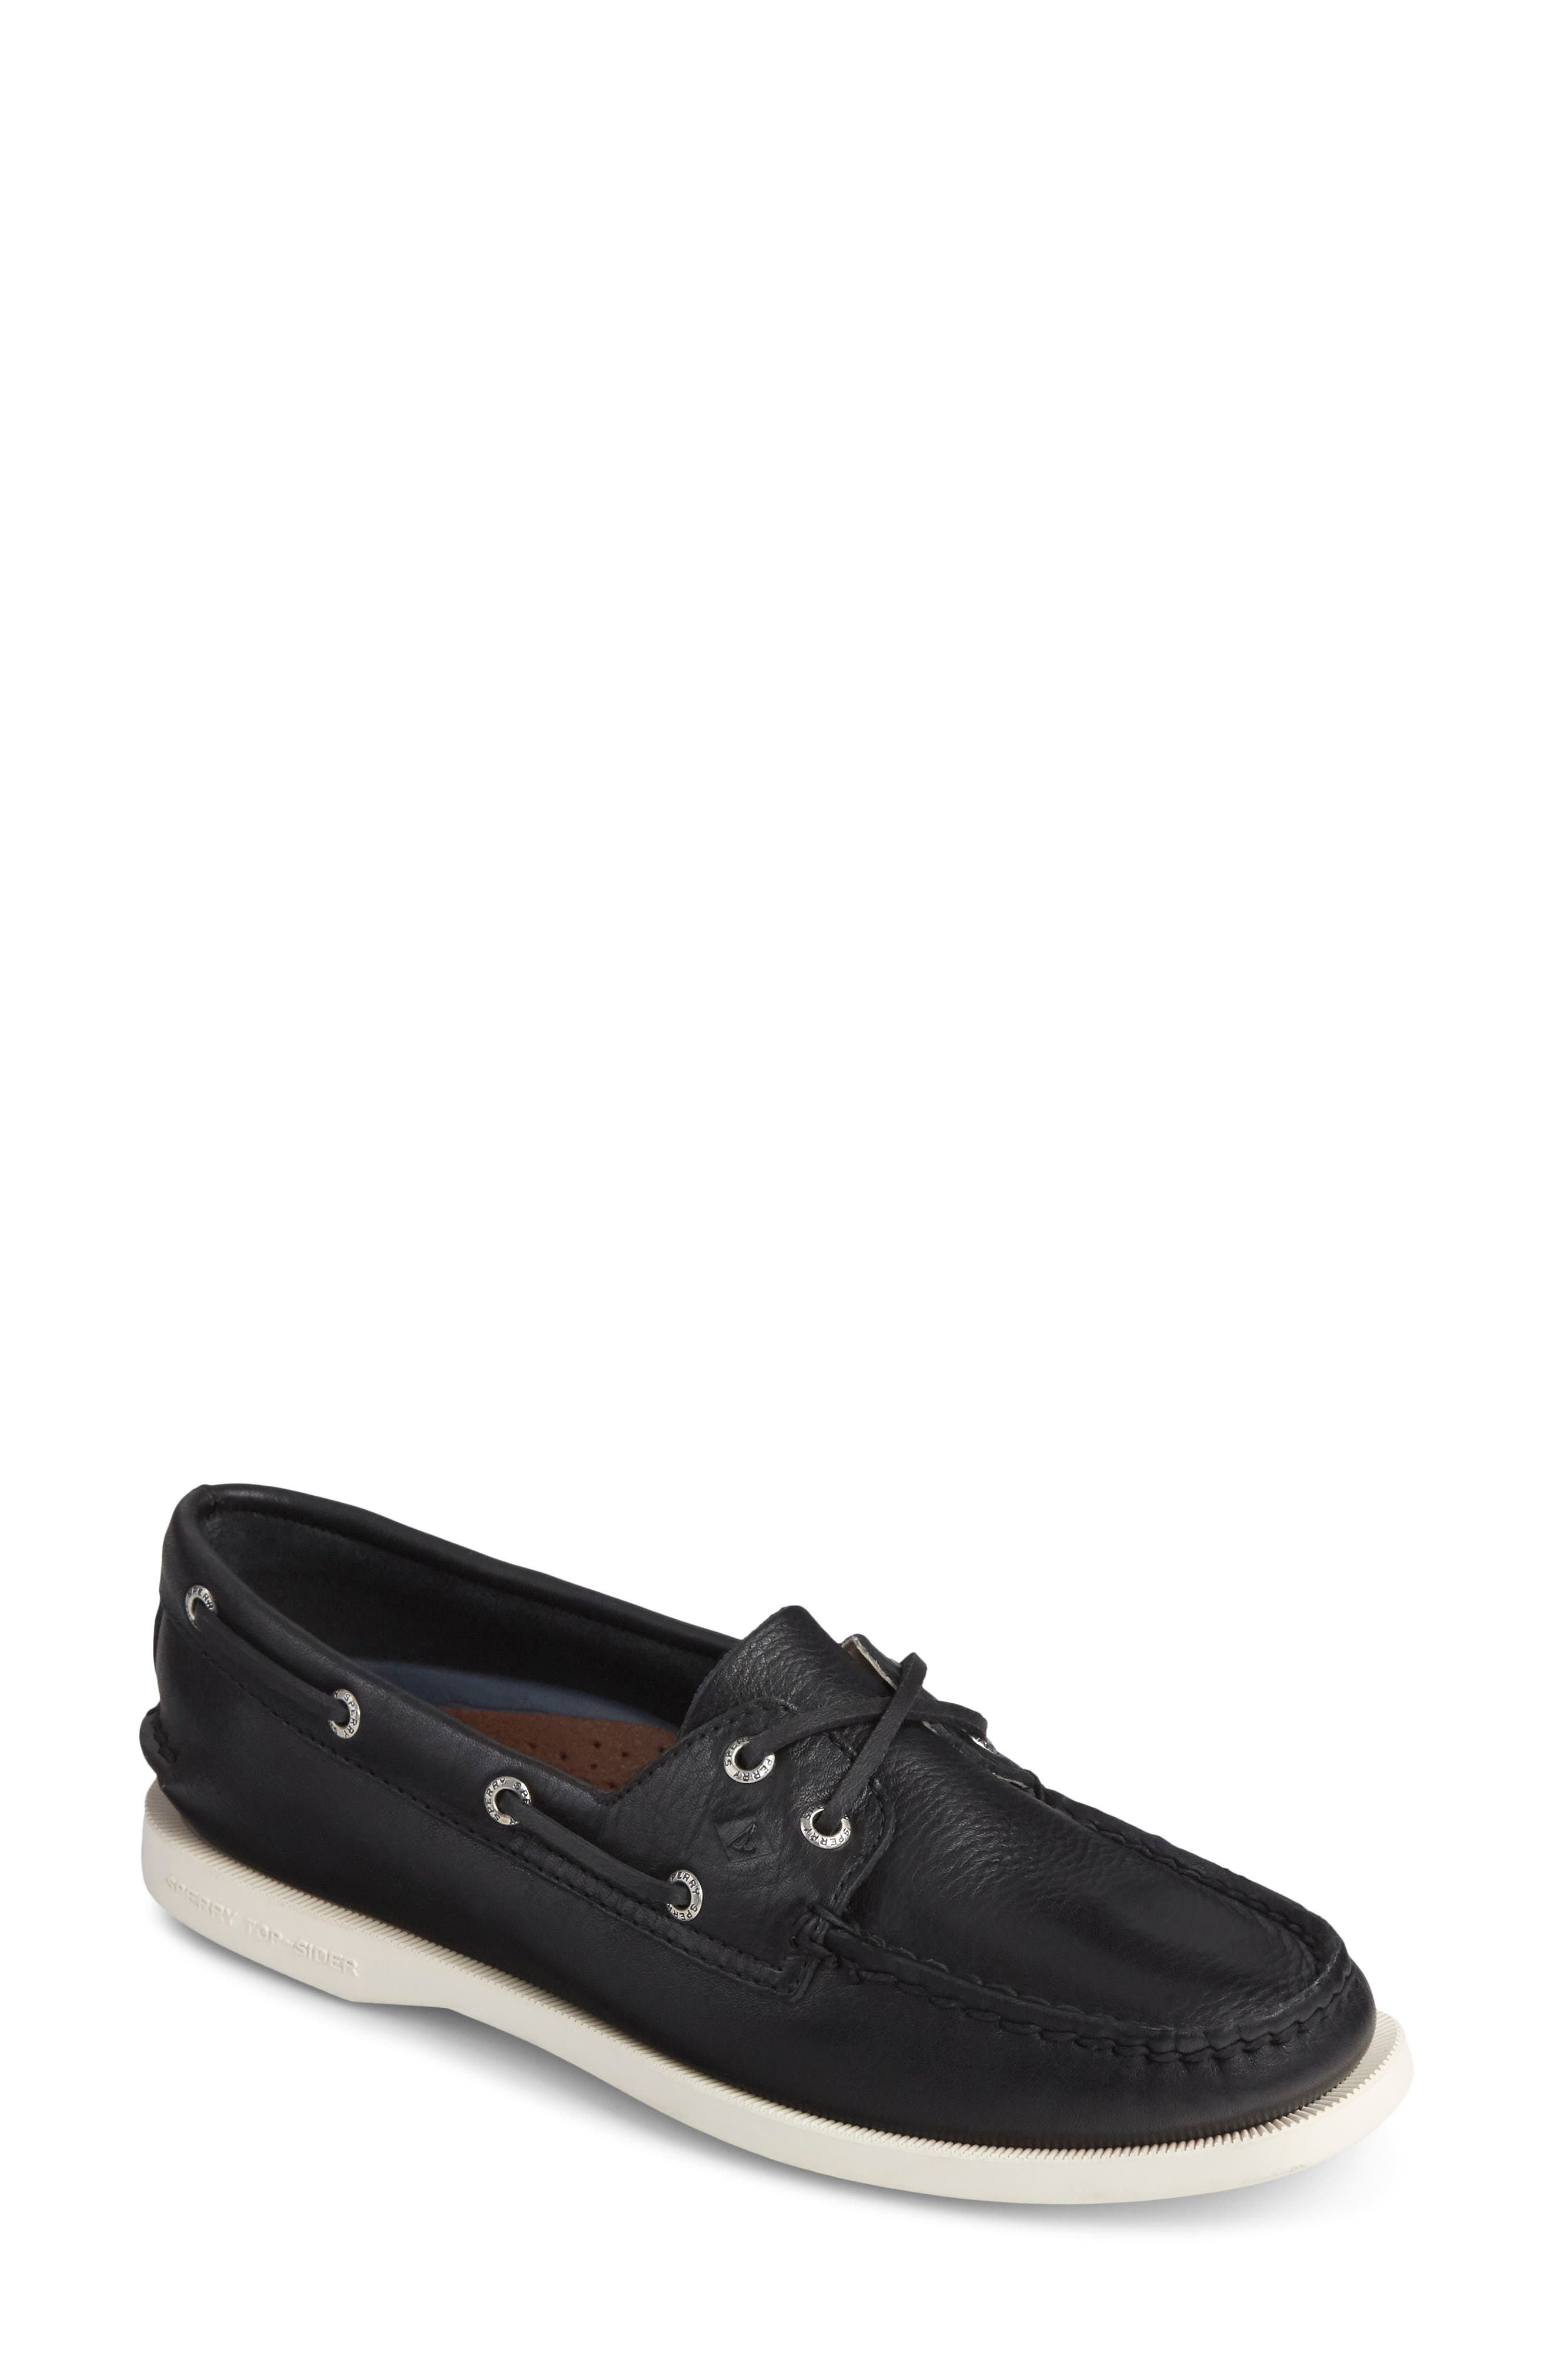 black leather boat shoes womens